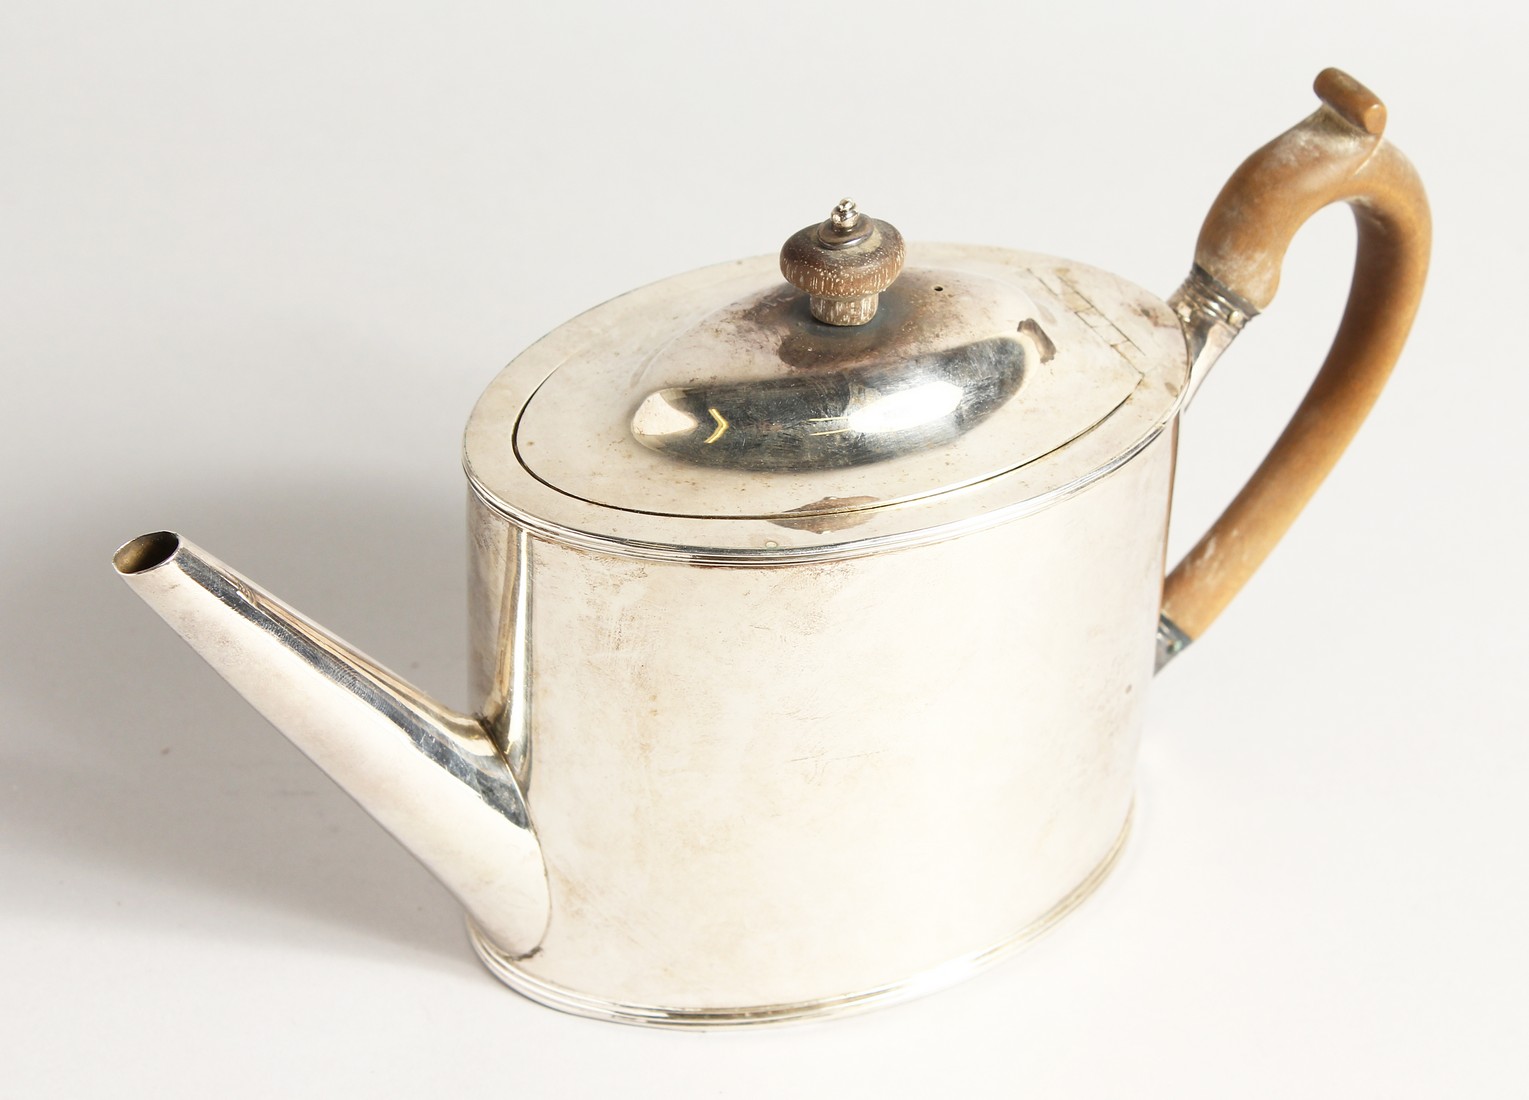 A GEORGE III PLAIN SILVER OVAL TEA POT and cover with wooden handles. London 1789, maker I. O.